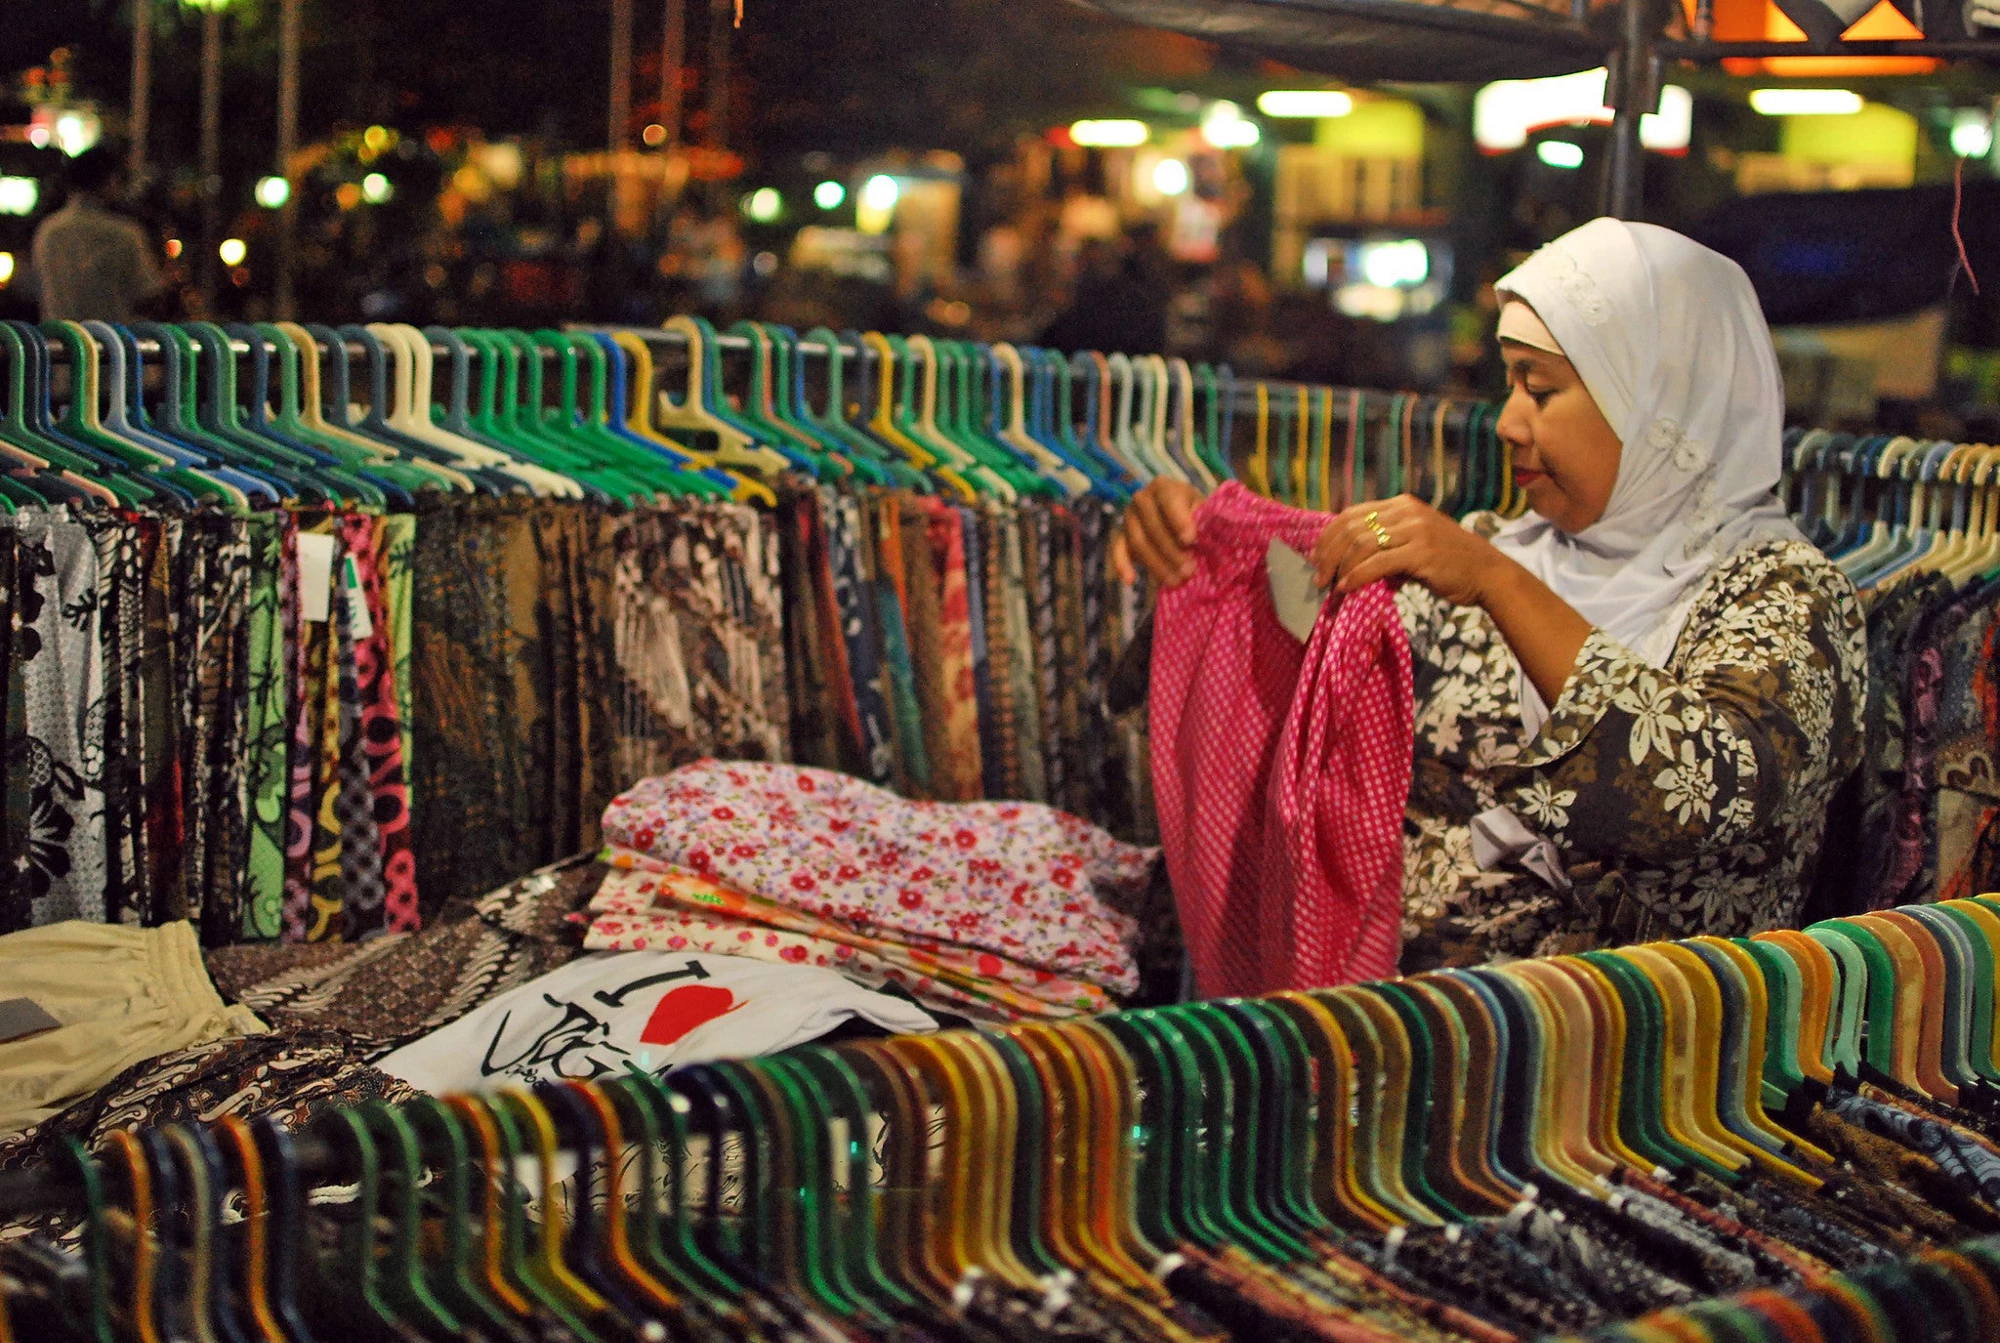 A woman buys clothes in a store in Indonesia.